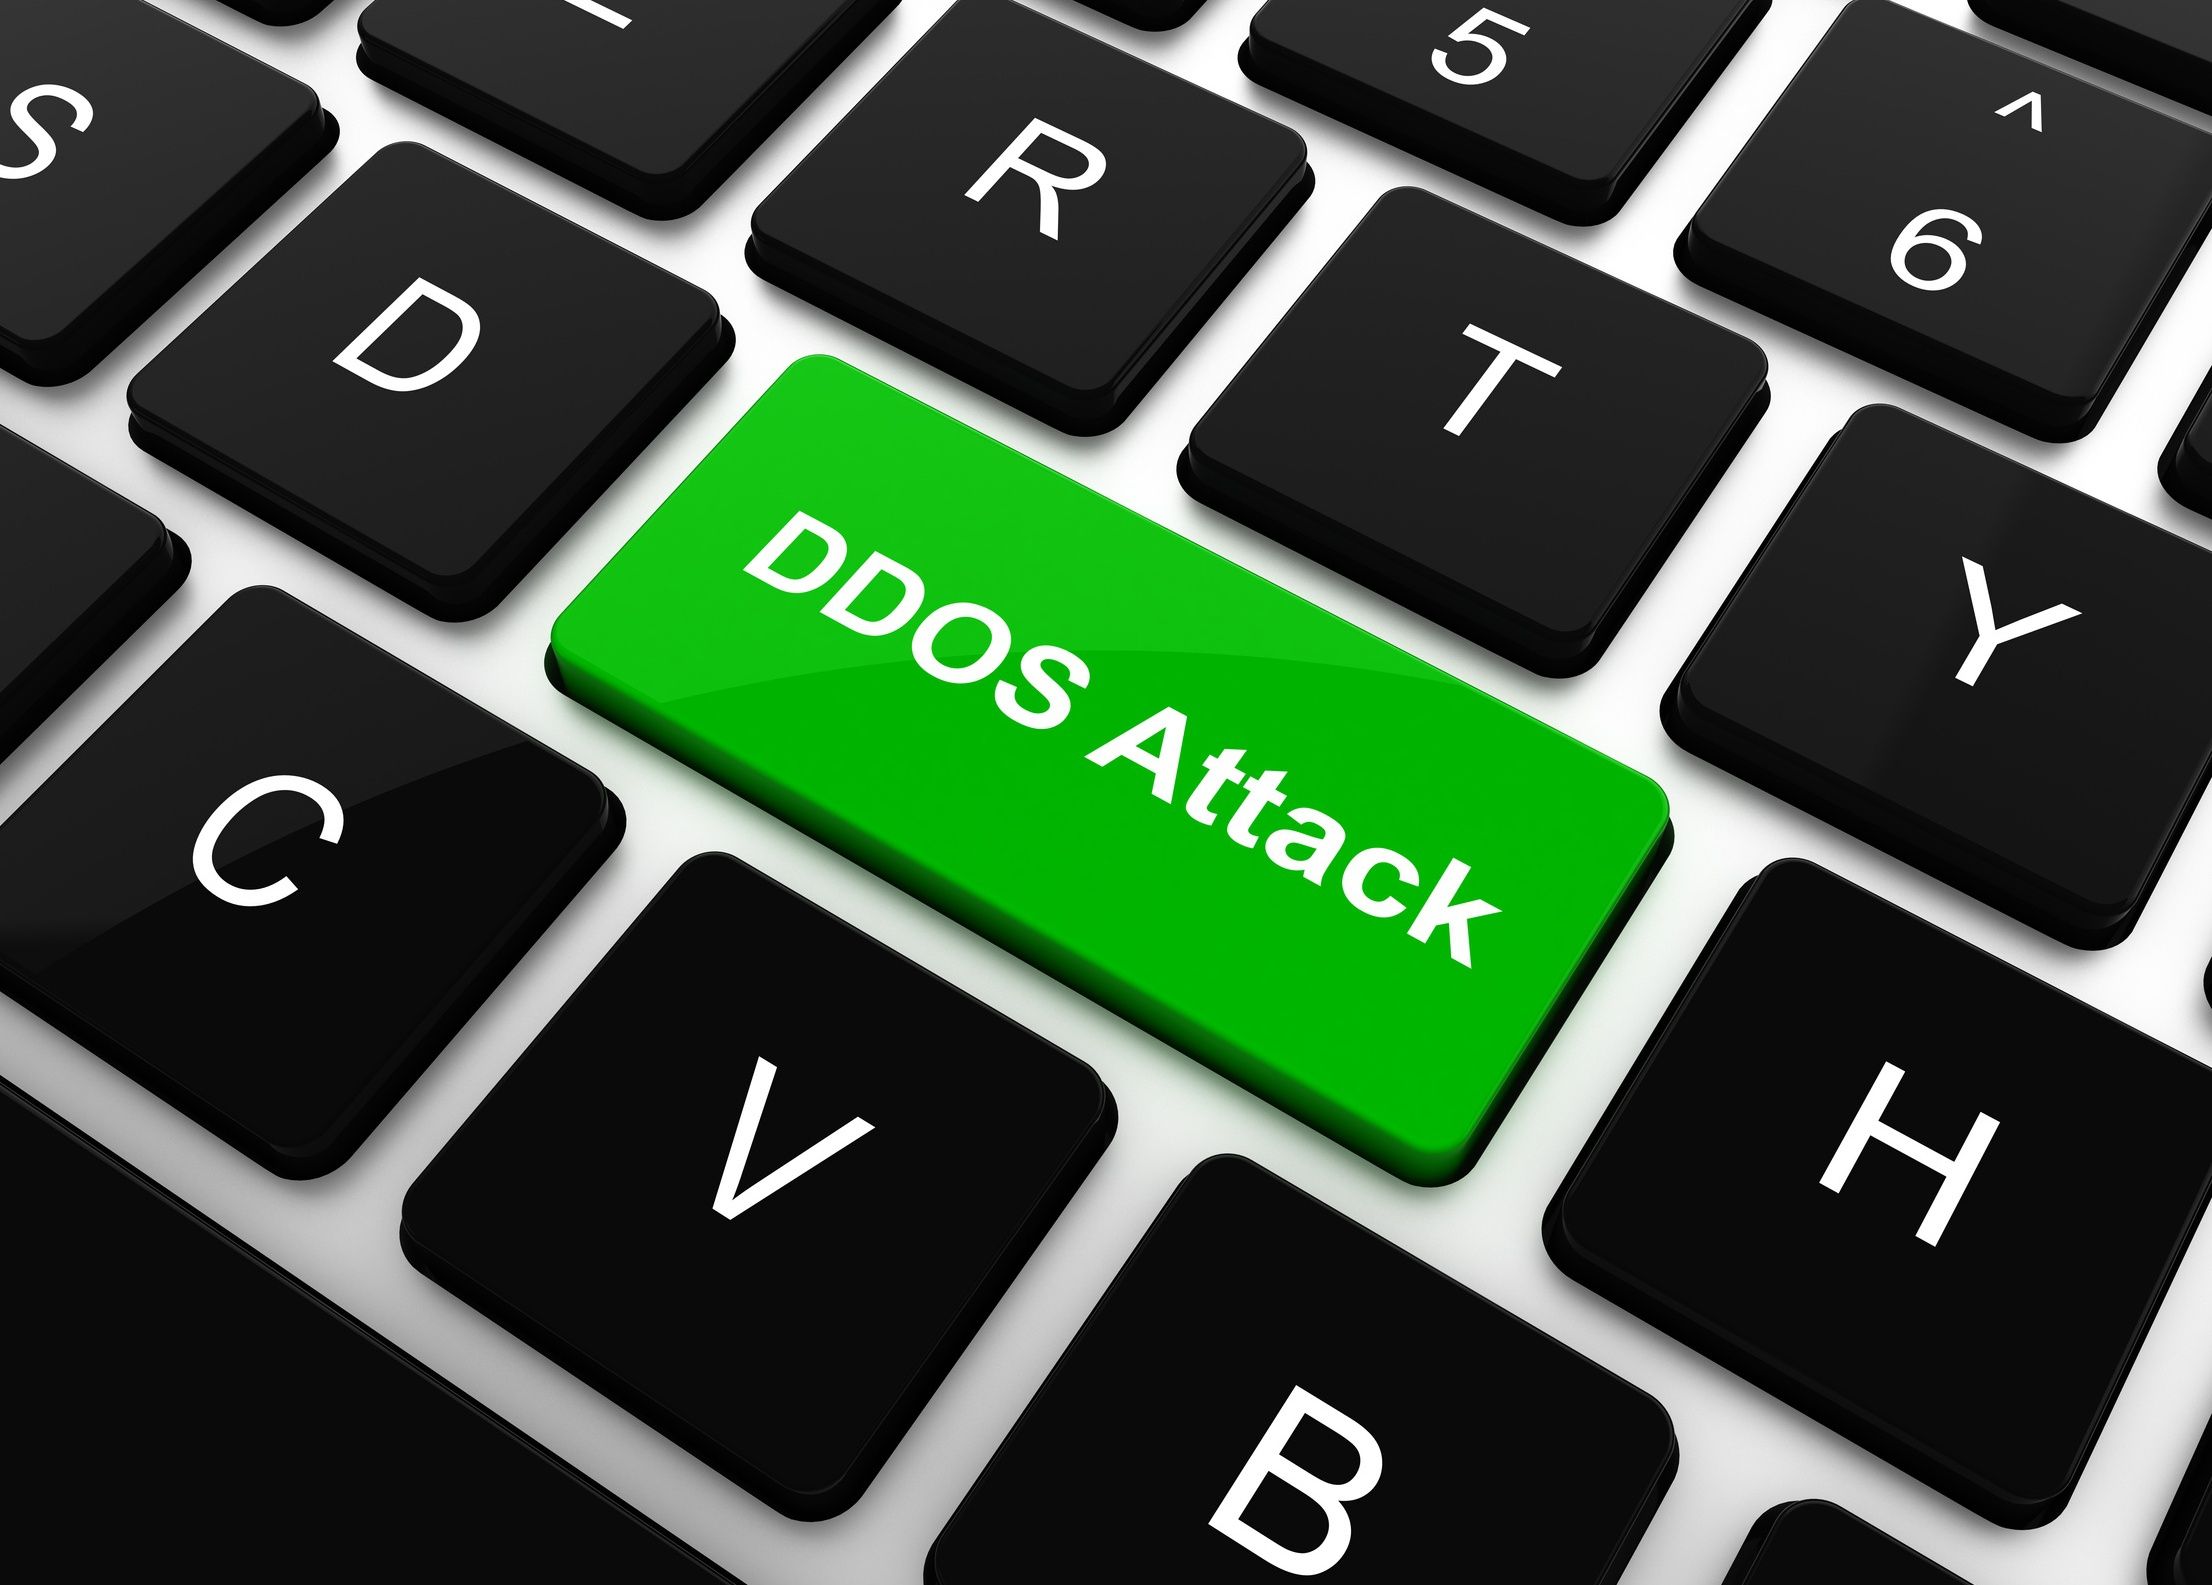 Overwatch sotto attacco DDOS